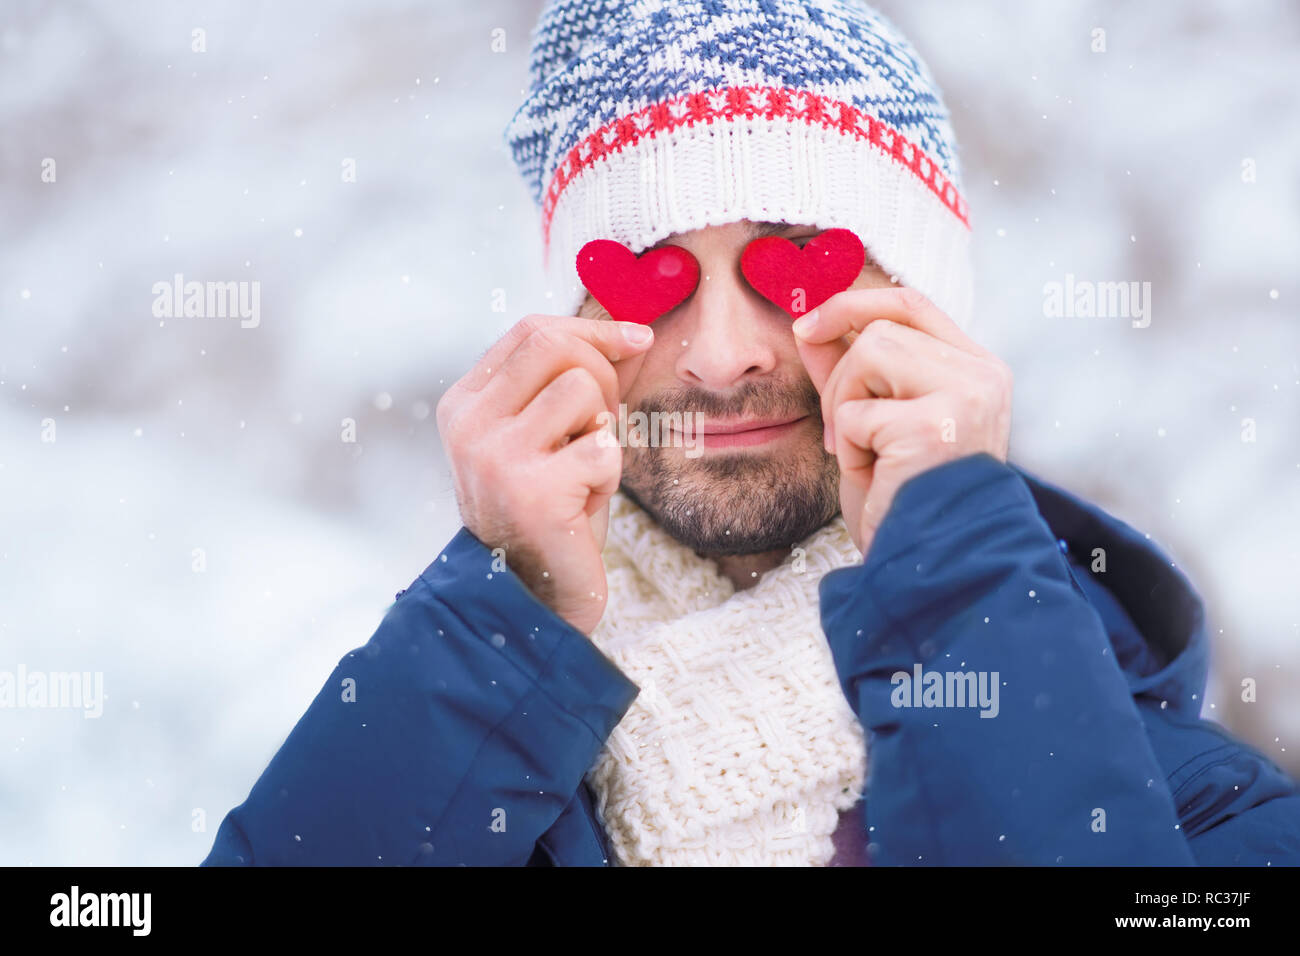 young caucasian man wearing blue jacket, hat and scarf holding two red hearts before his eyes outdoors for Valentines day Stock Photo